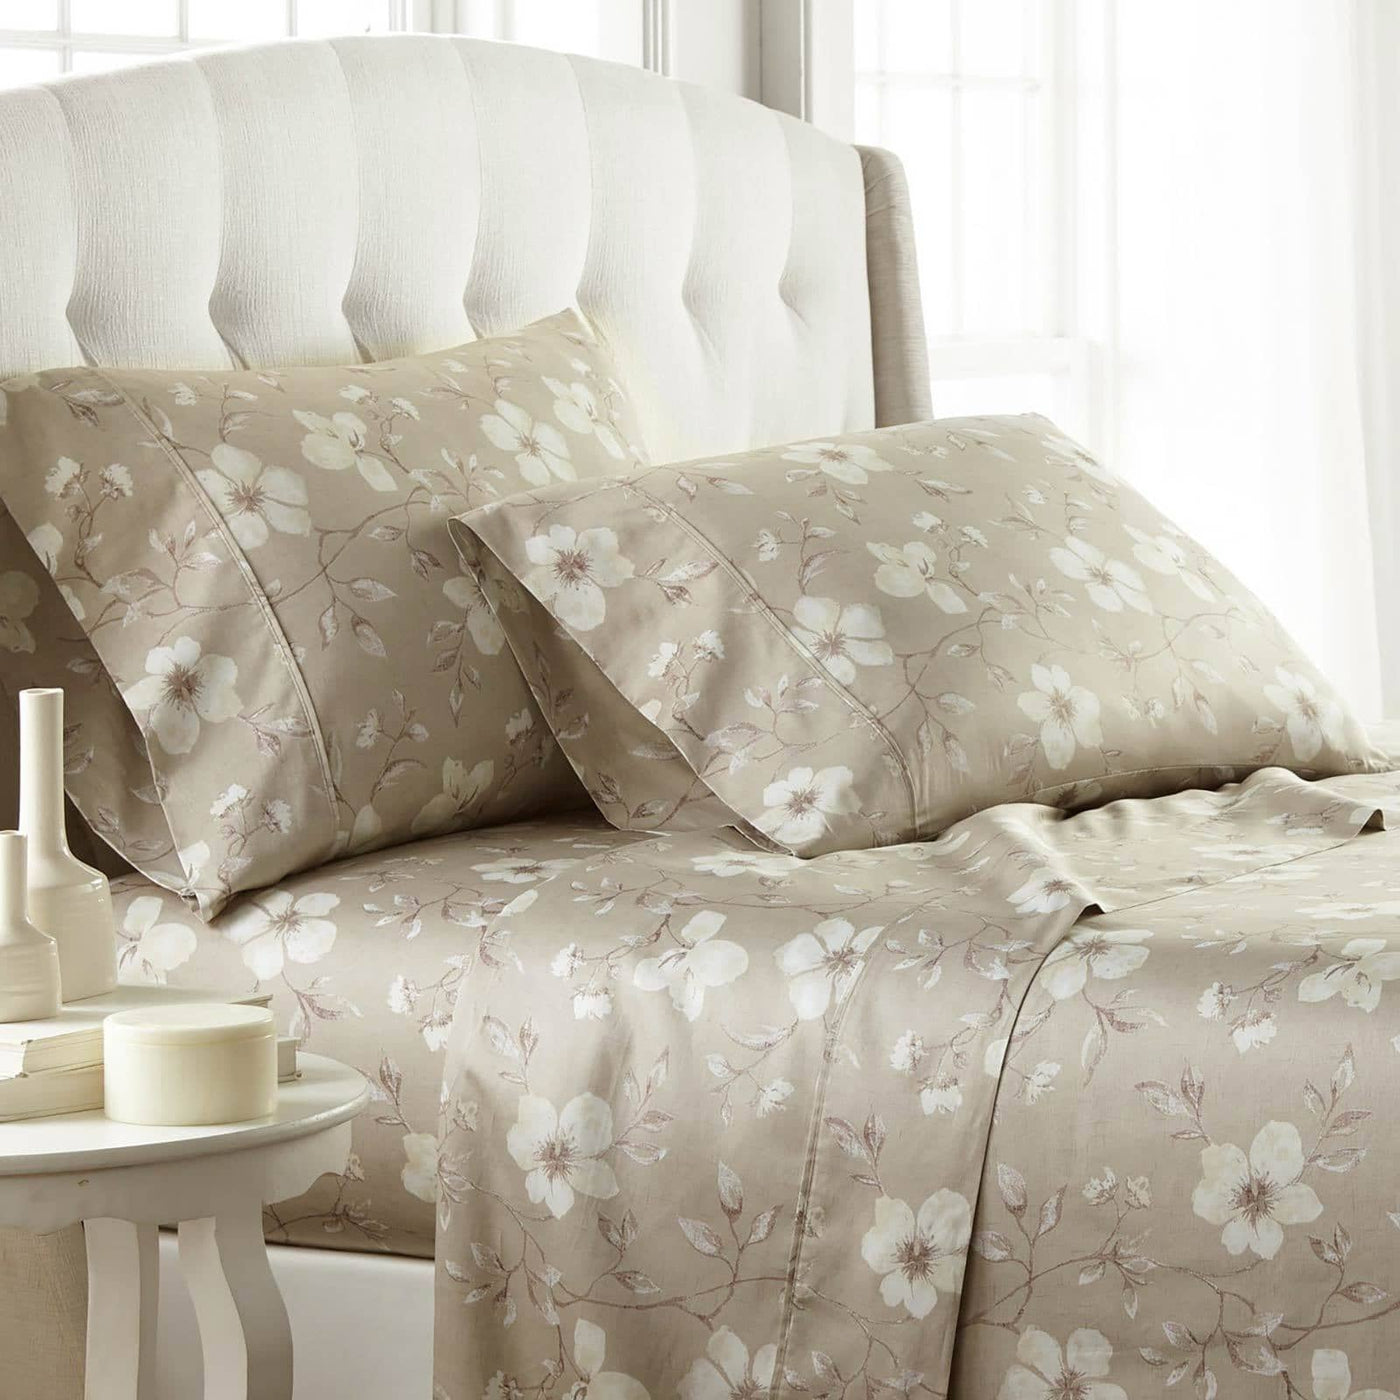 Mystic Garden 100% Cotton Sateen Pillow Cases in Taupe Grey#color_mystic-taupe-grey